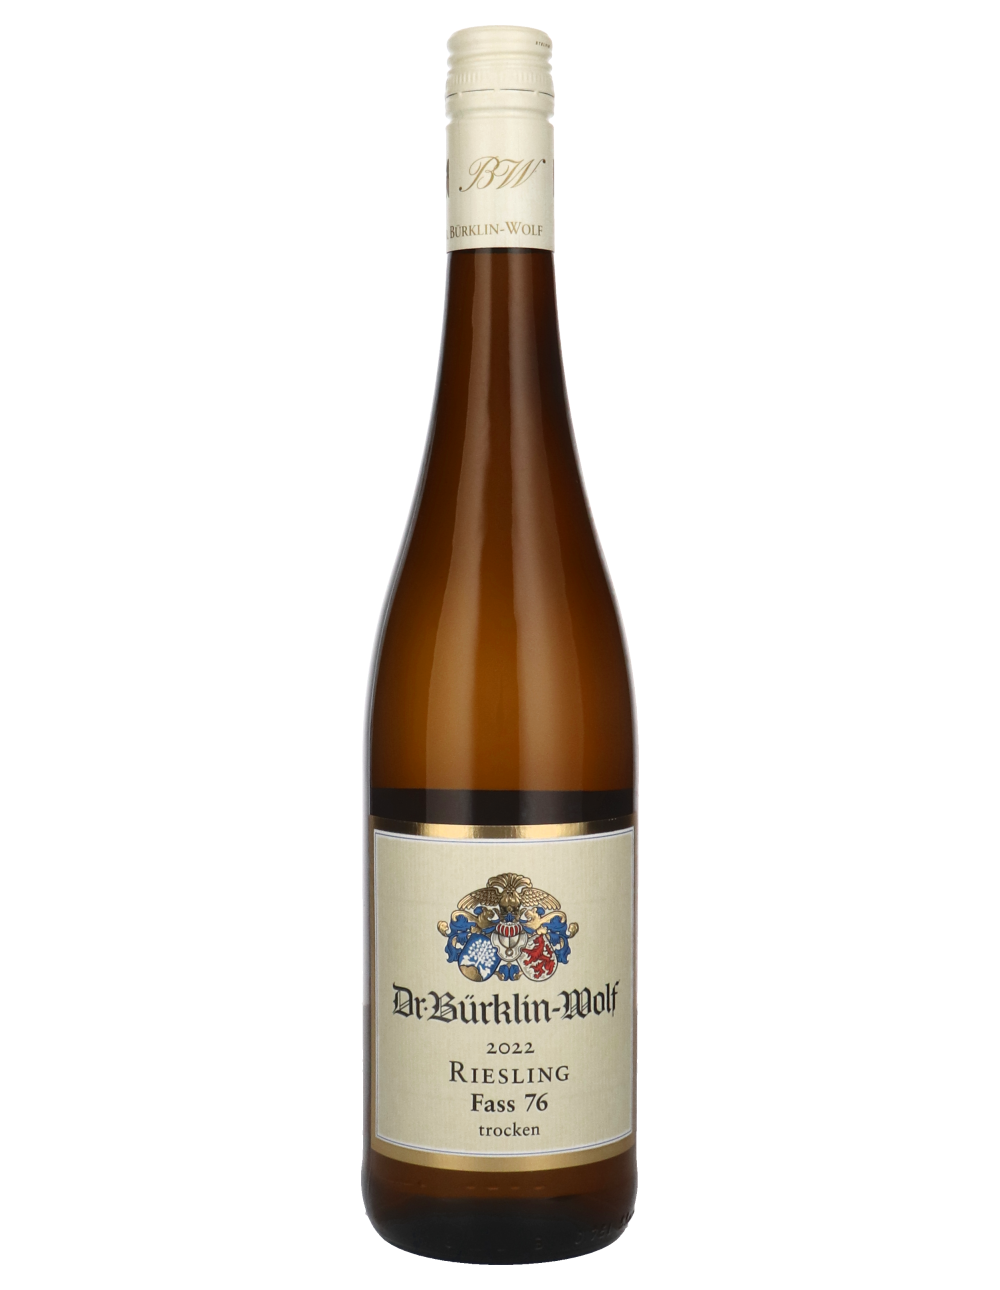 Riesling Fass 76